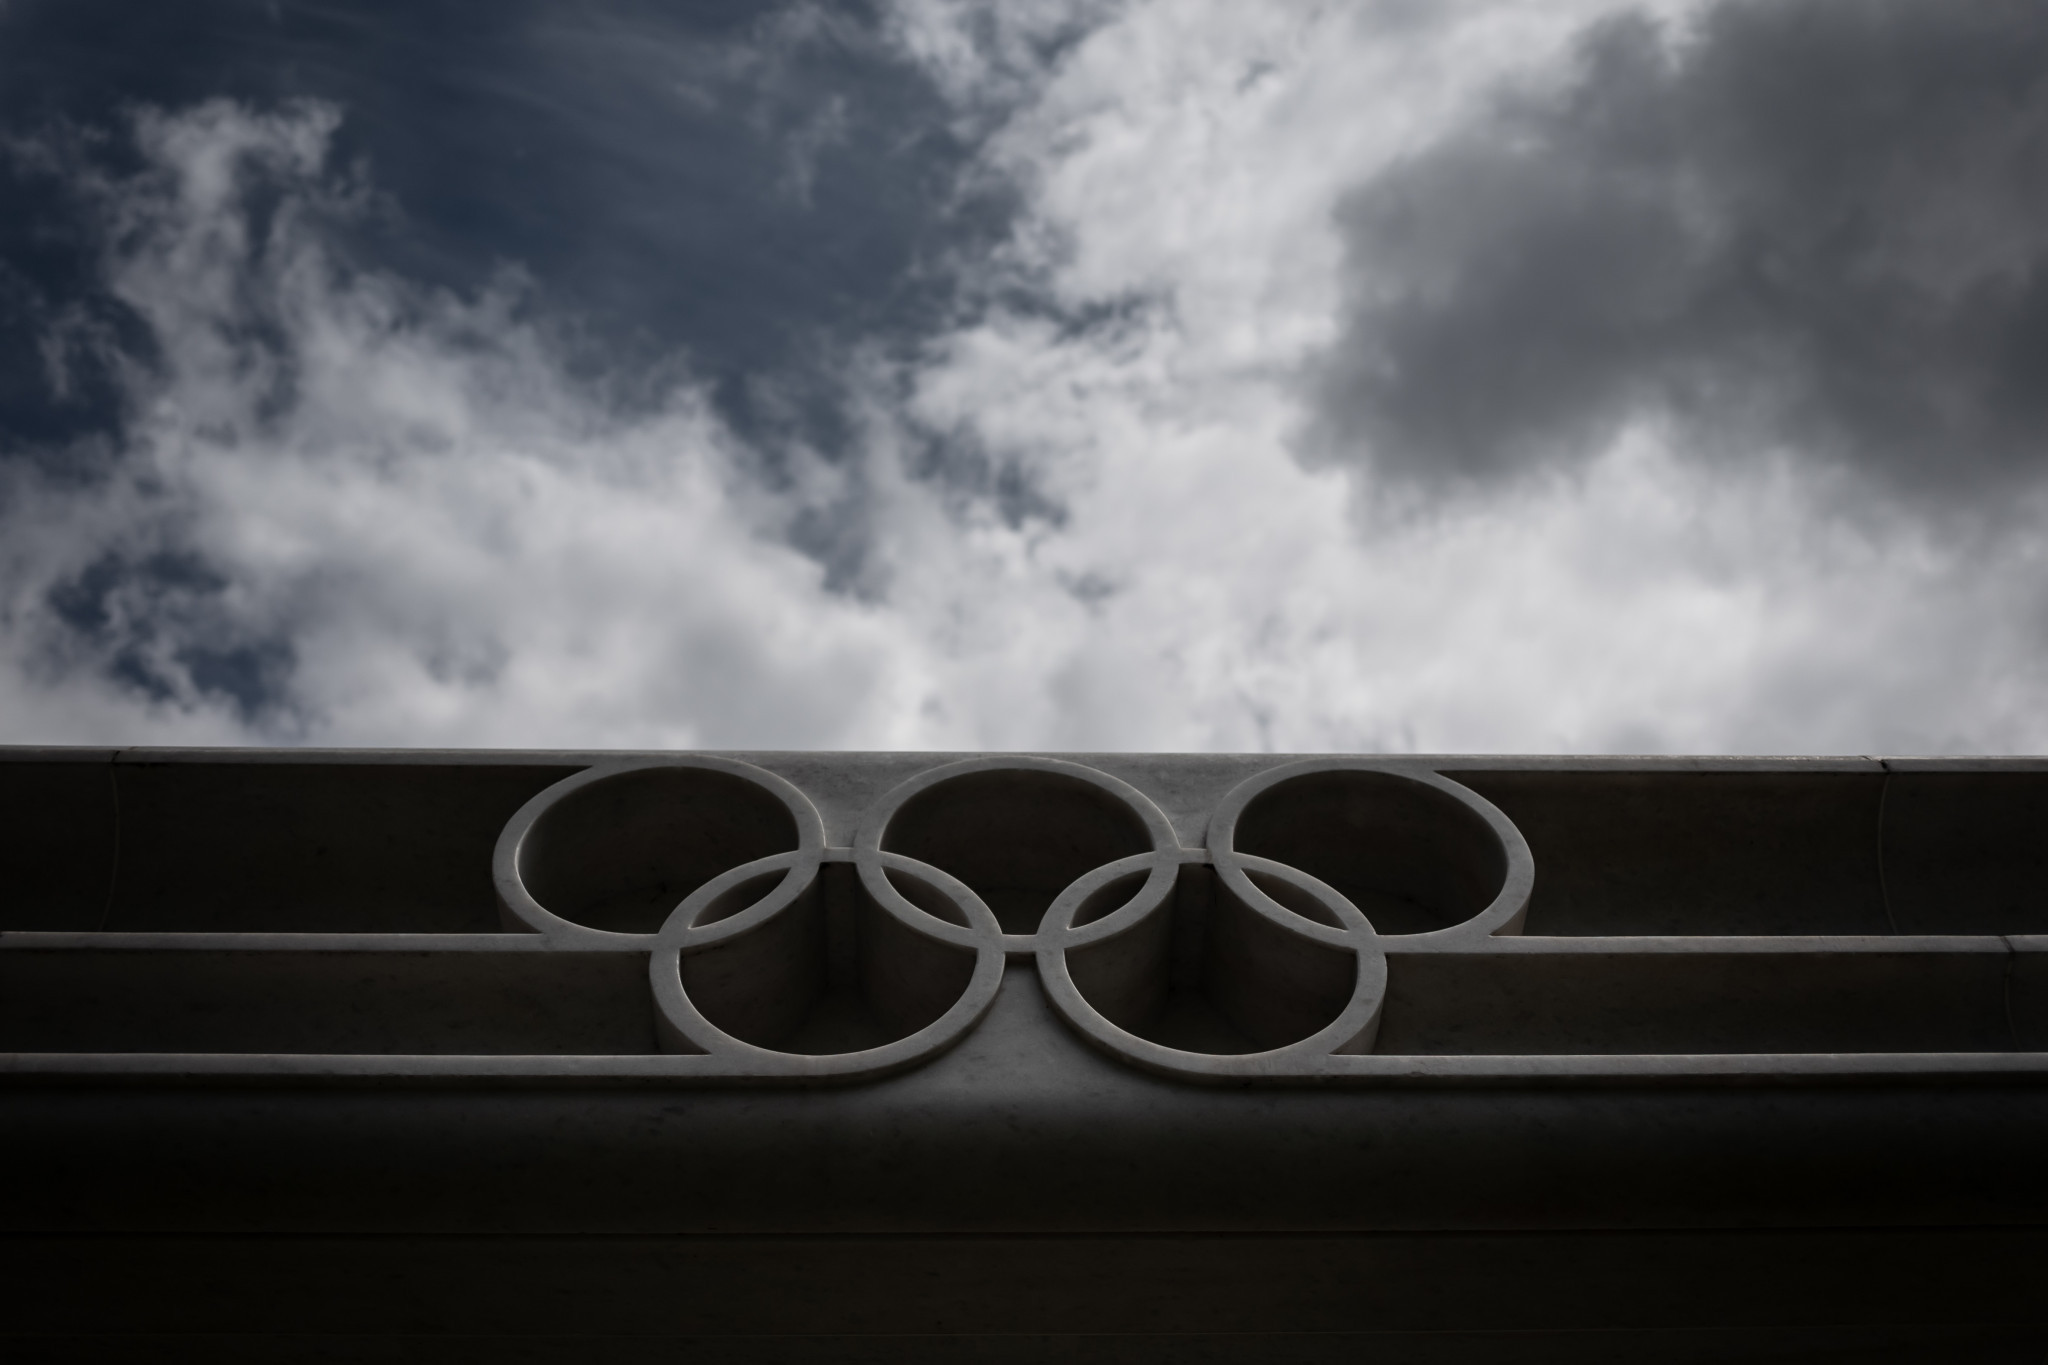 The Hungarian Olympic Committee is awaiting further dialogue with the International Olympic Committee over the 2032 Games ©Getty Images